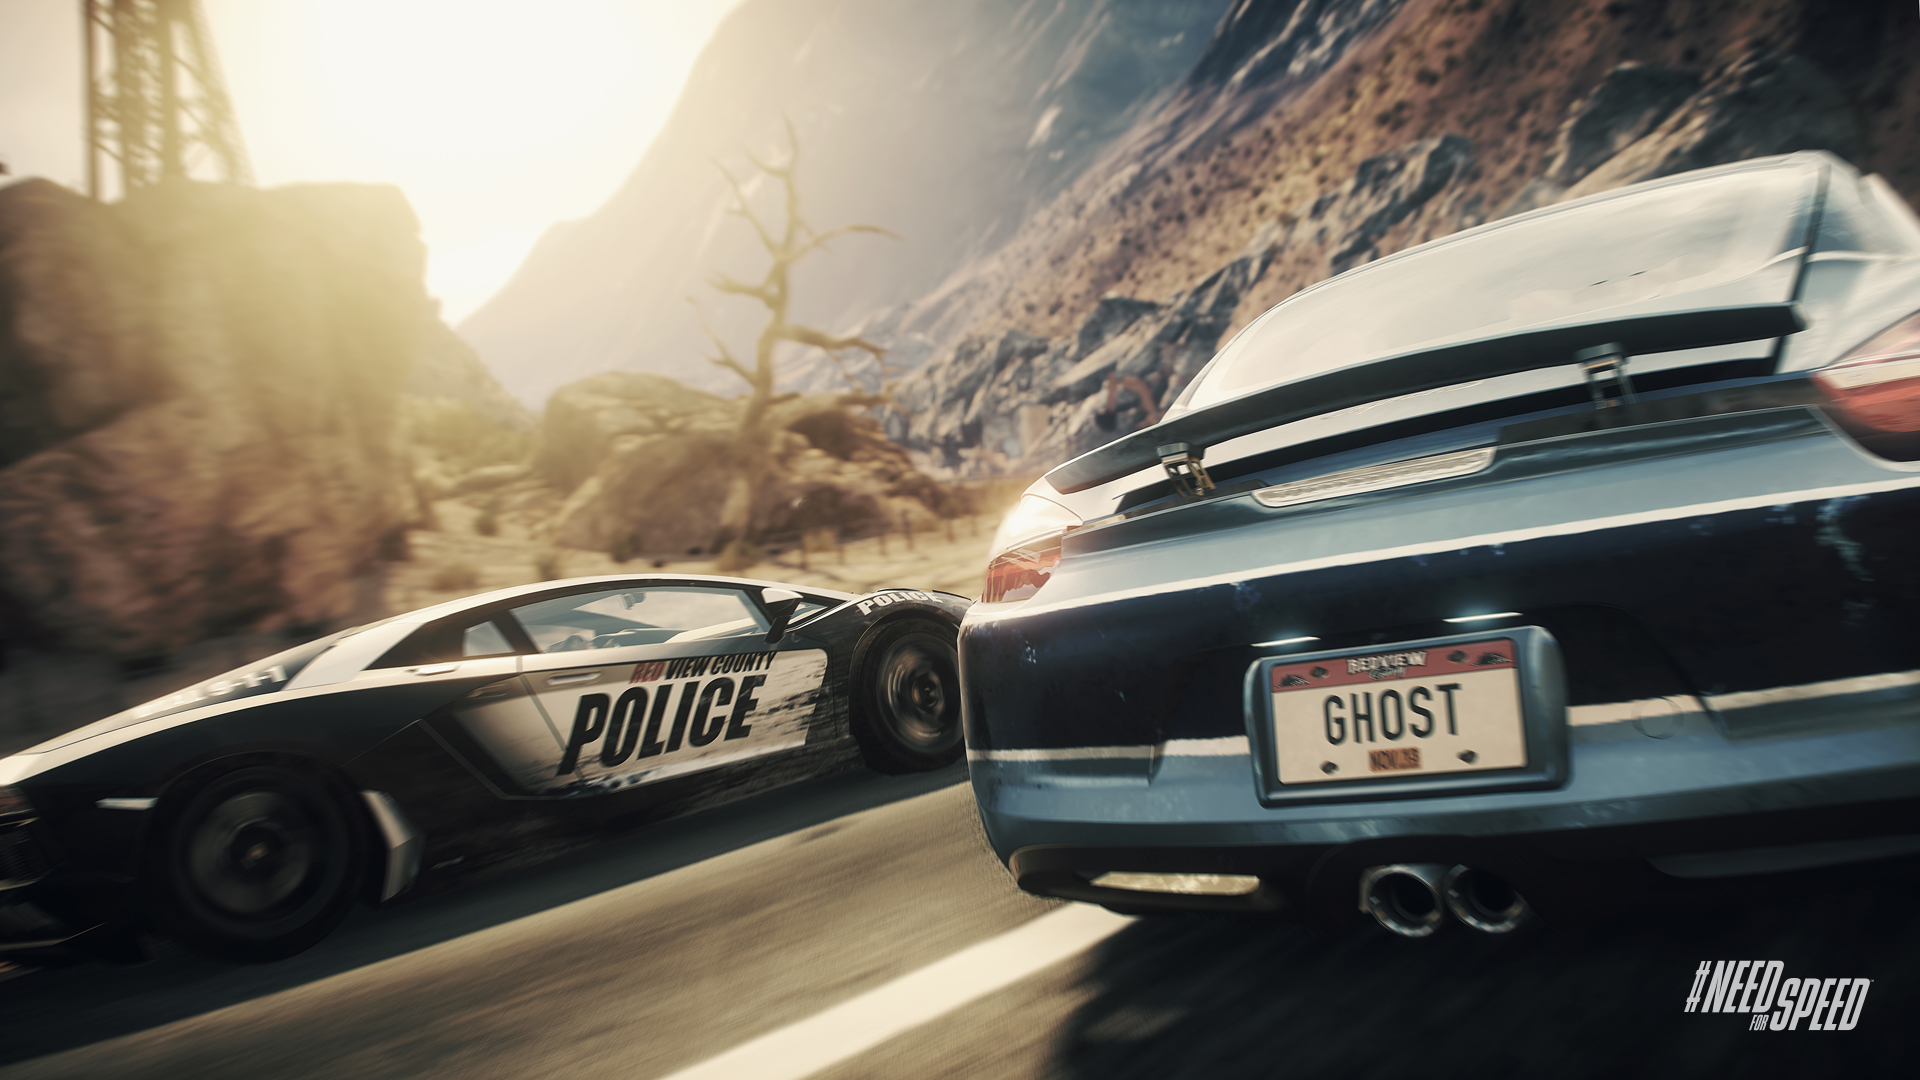 Need for speed rivals mac